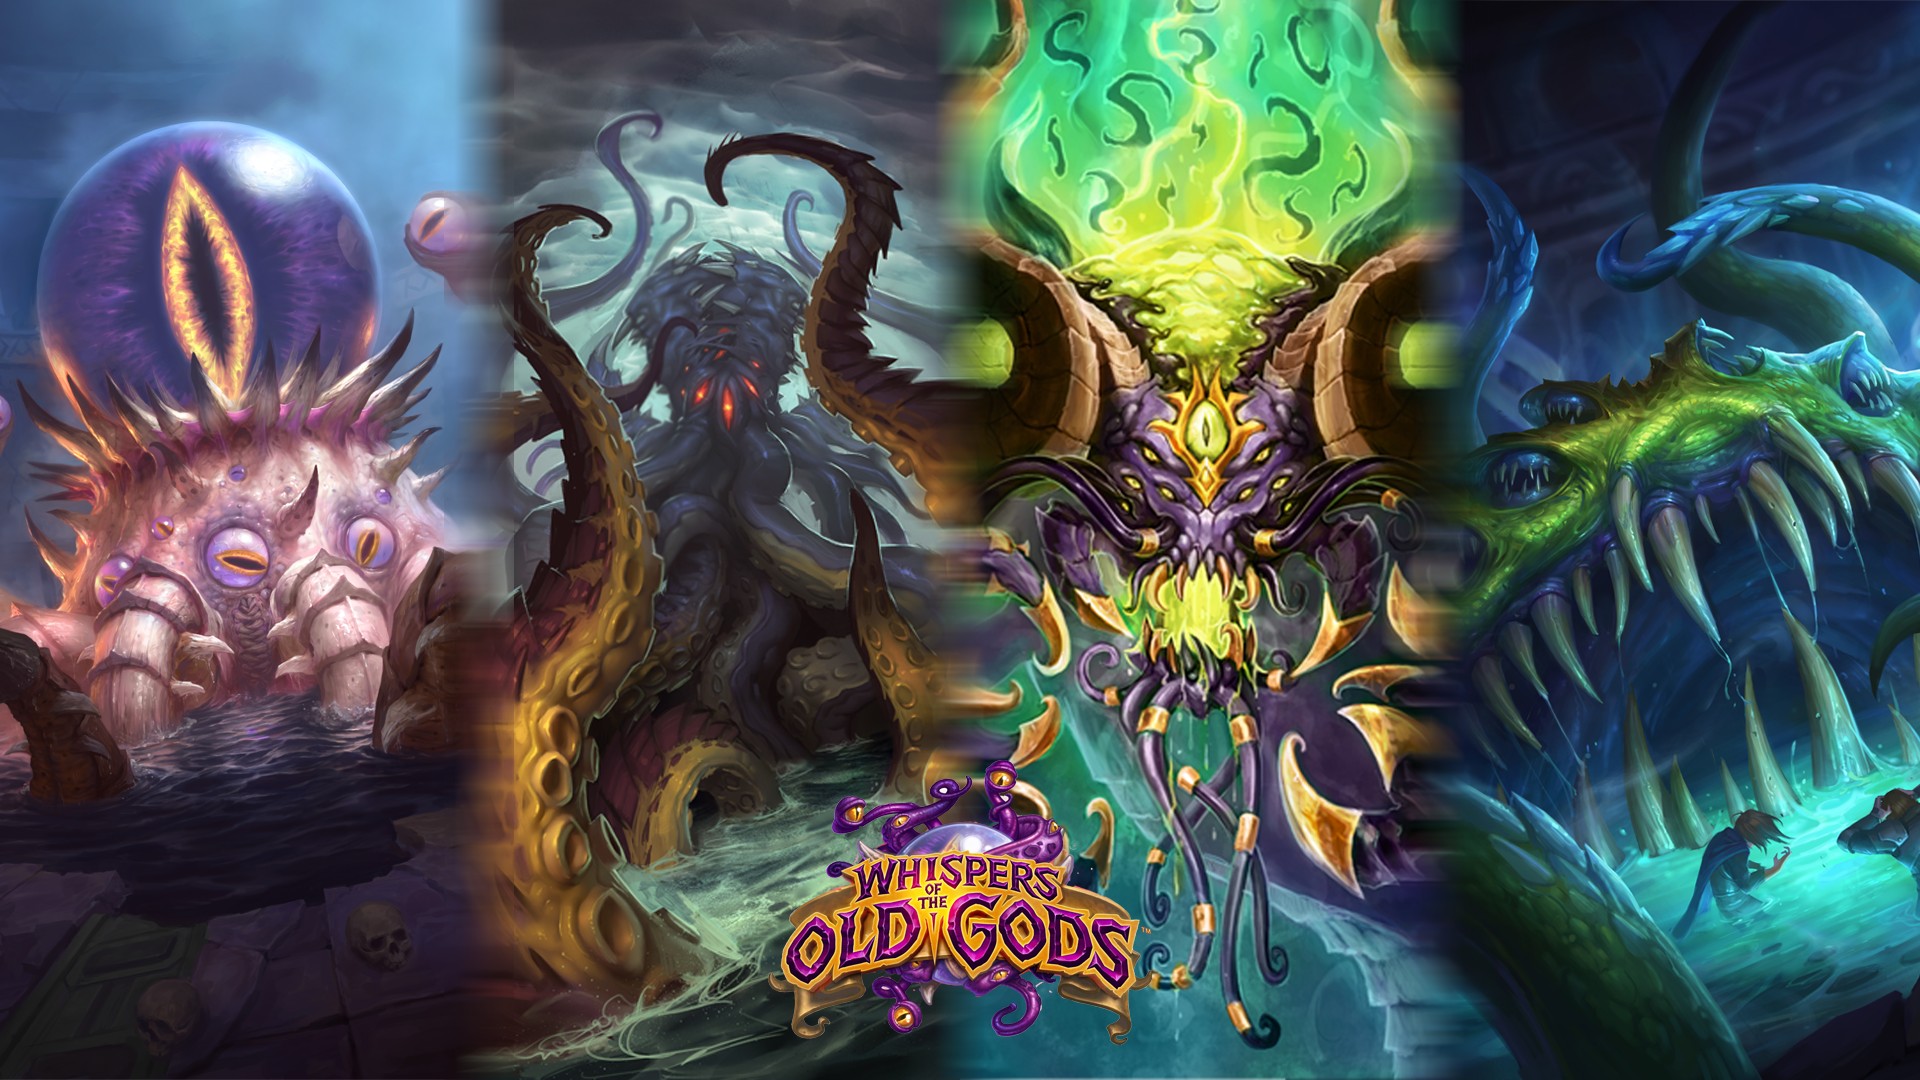 Warcraft, Whispers of the old gods, Hearthstone: Heroes of Warcraft, Hearthstone, CThun, Yogg Saron Wallpaper